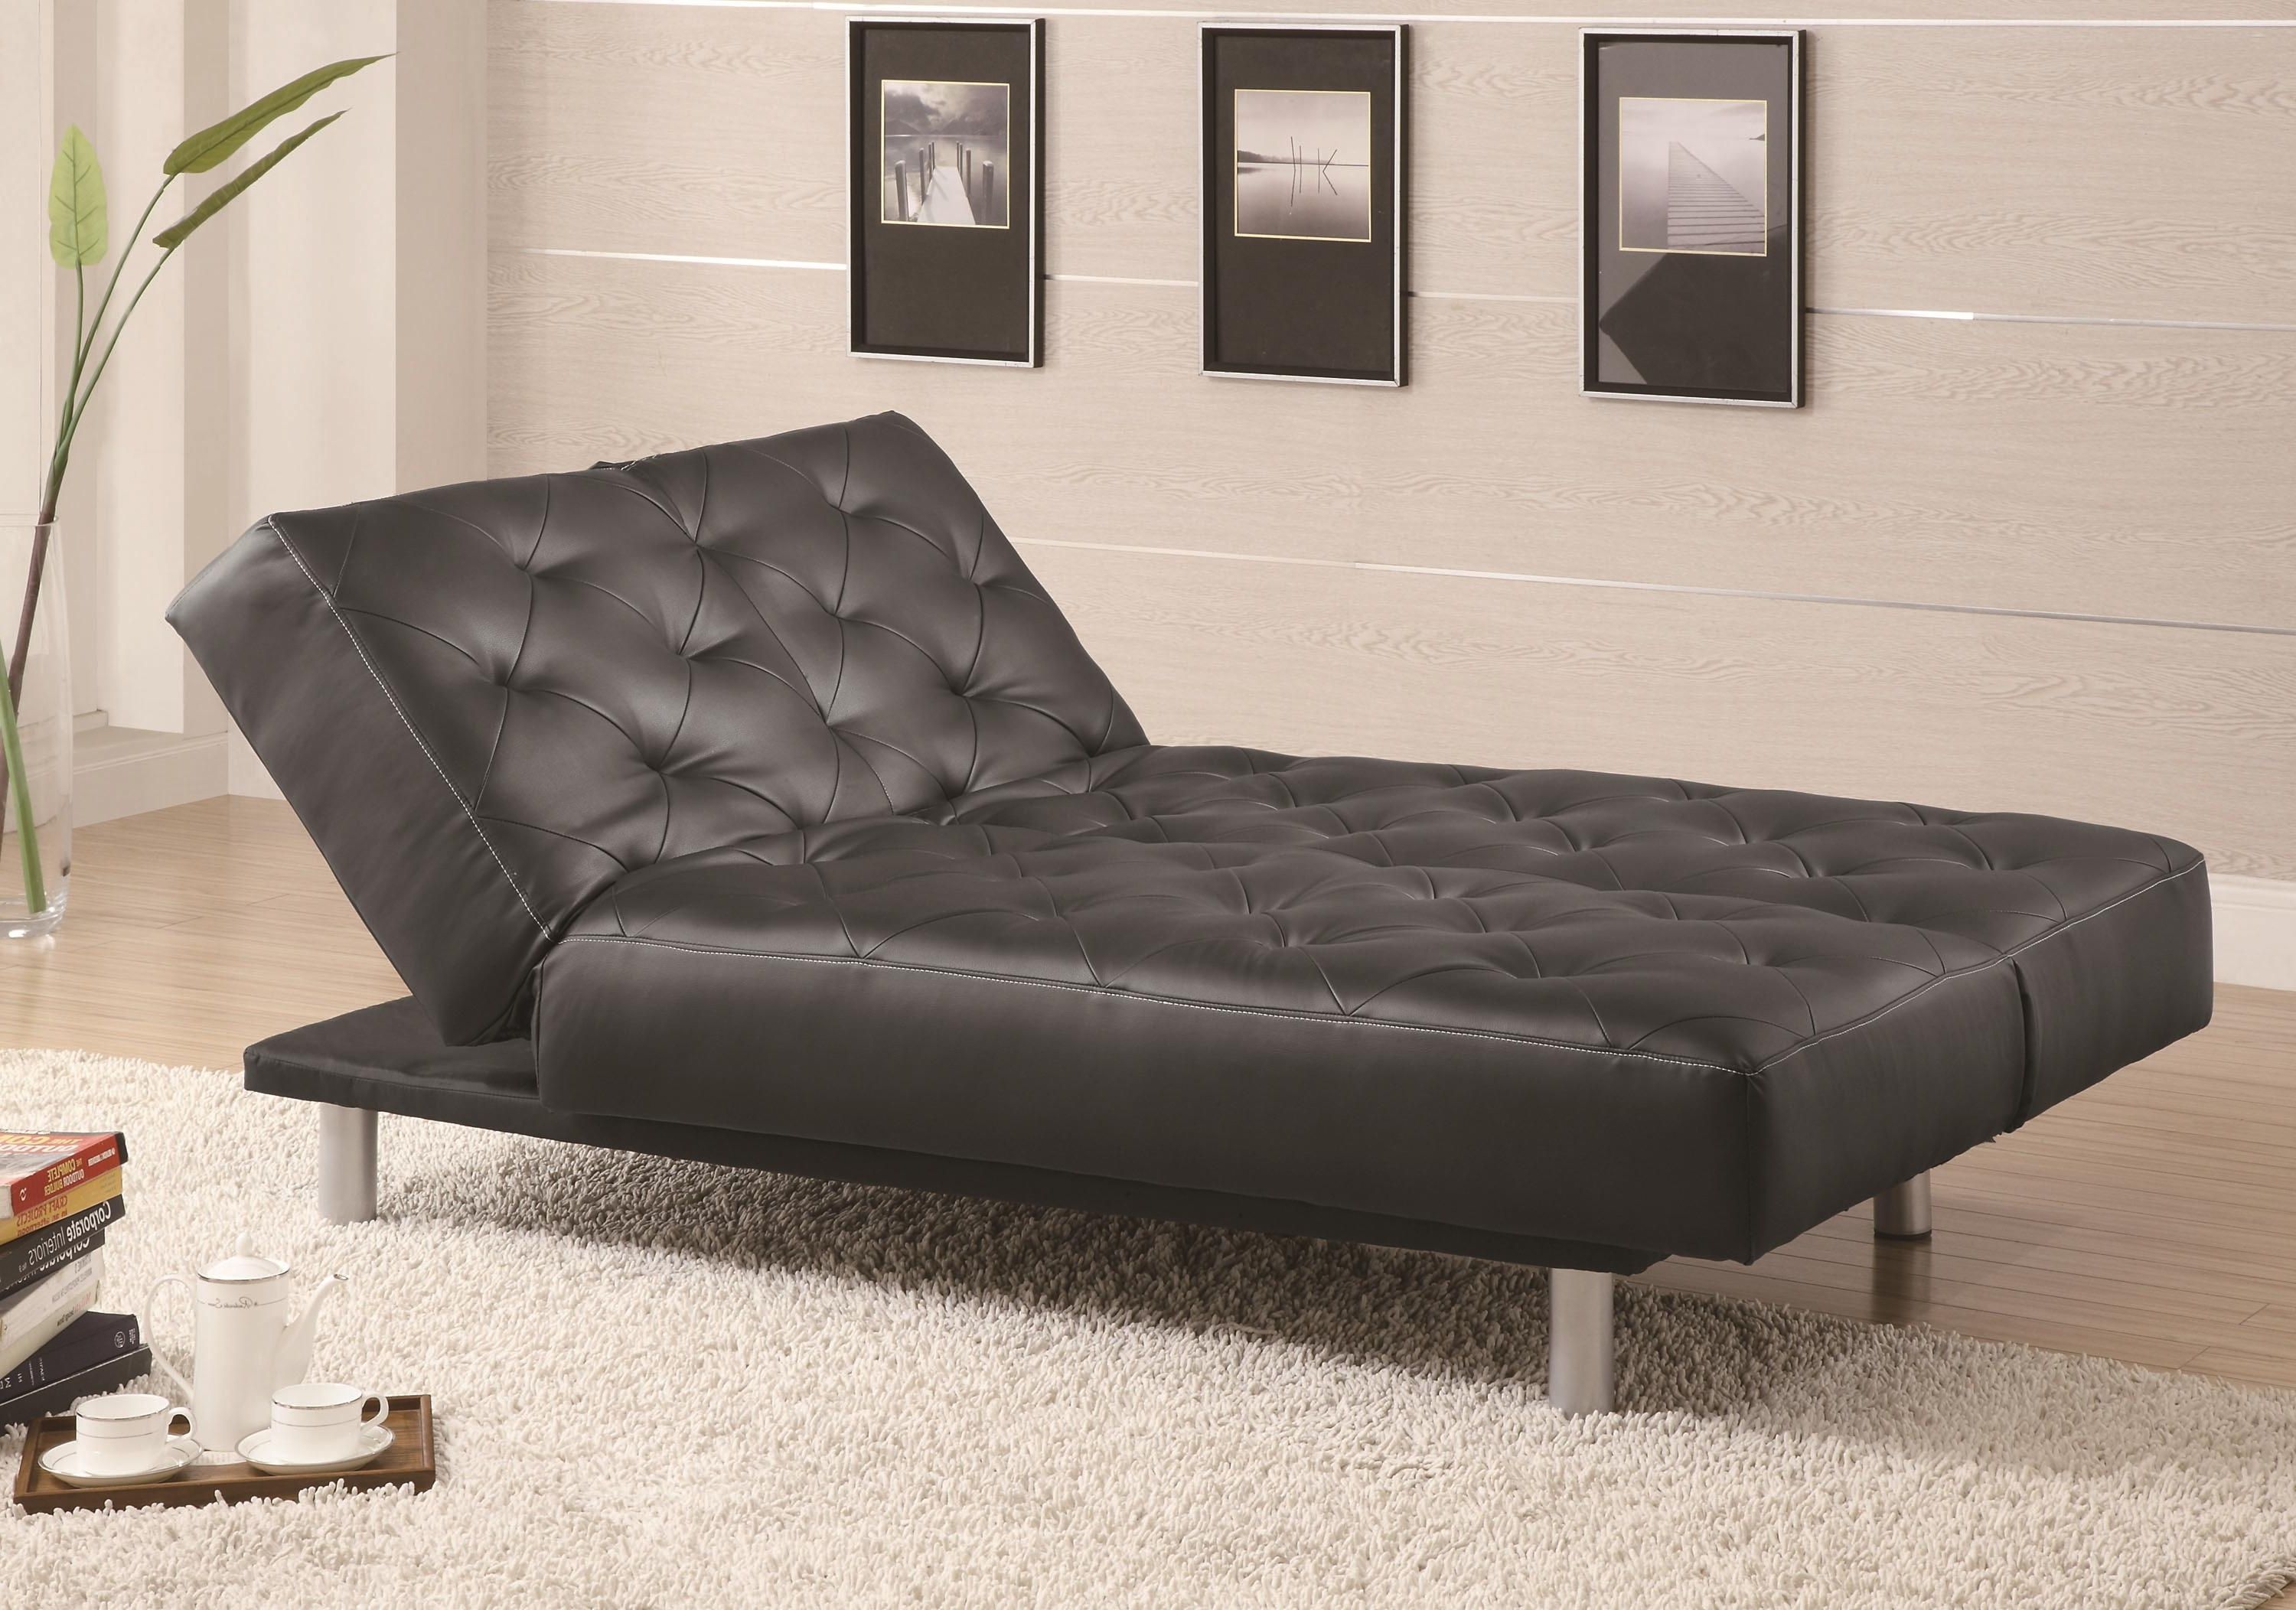 Fashionable Futon Chaises Pertaining To Coaster Sofa Beds And Futons Black Vinyl Tufted Sofa Bed/oversize (View 11 of 15)